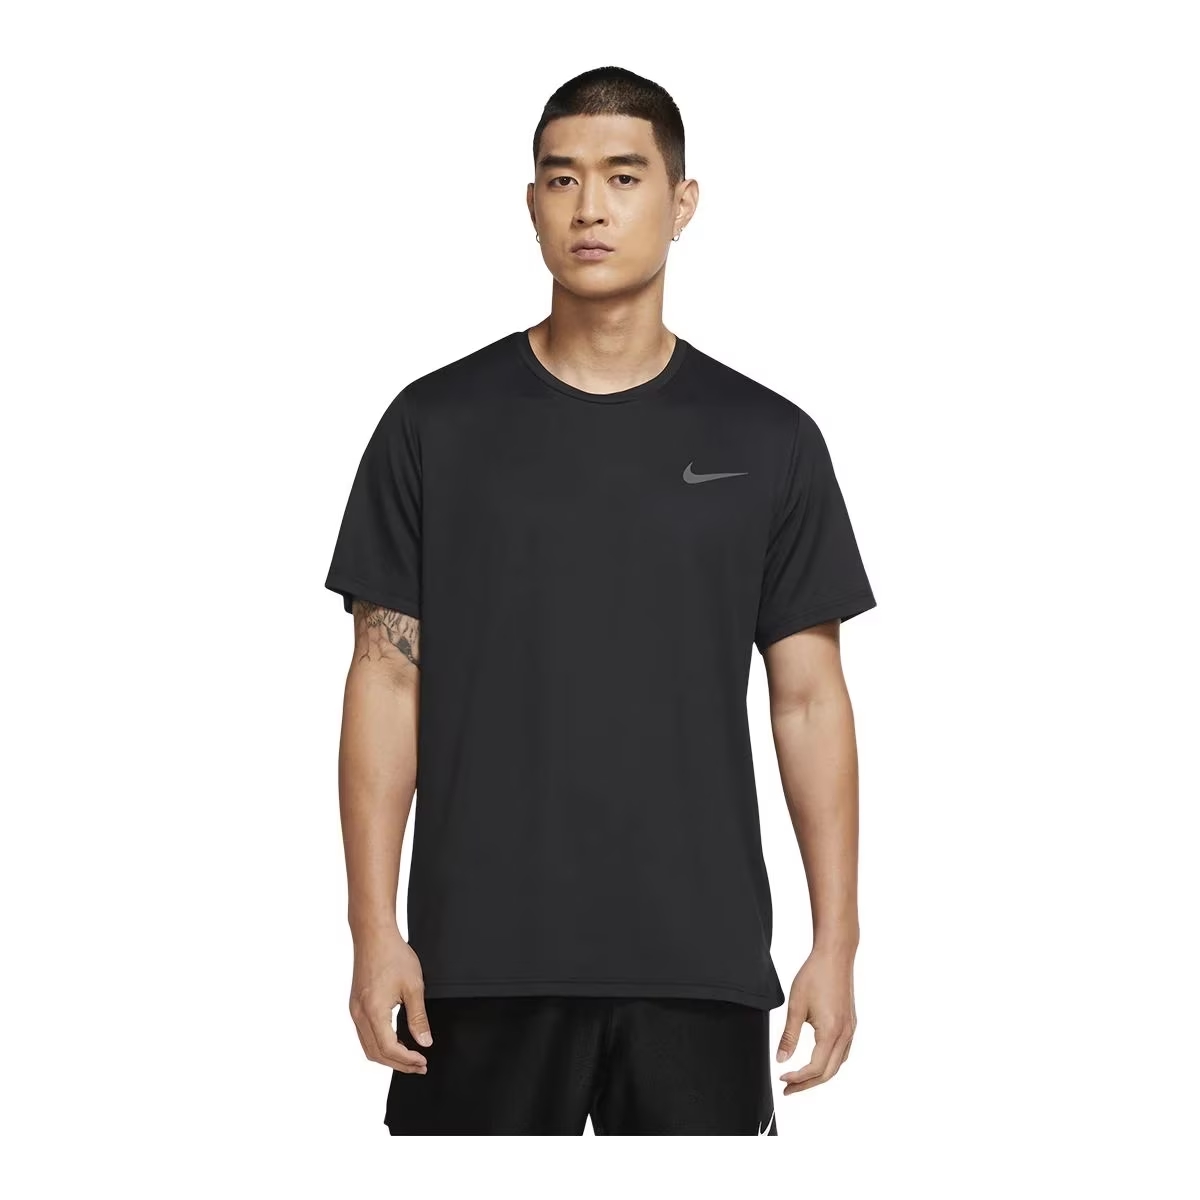 11 Unbelievable Nike Dri-Fit Shirts For Men For 2023